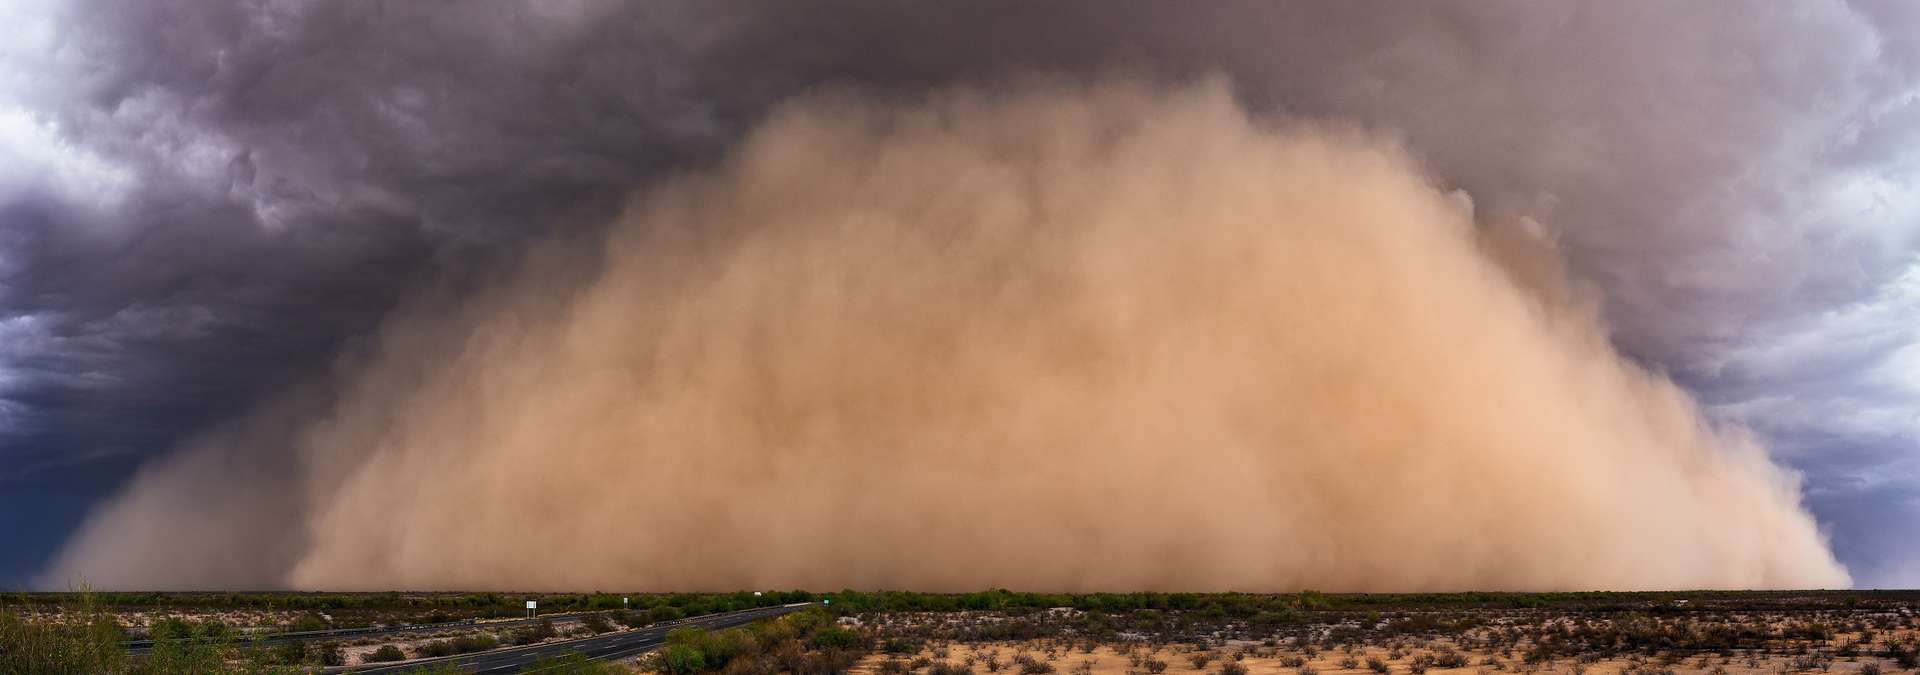 A monstrous sandstorm in Egypt